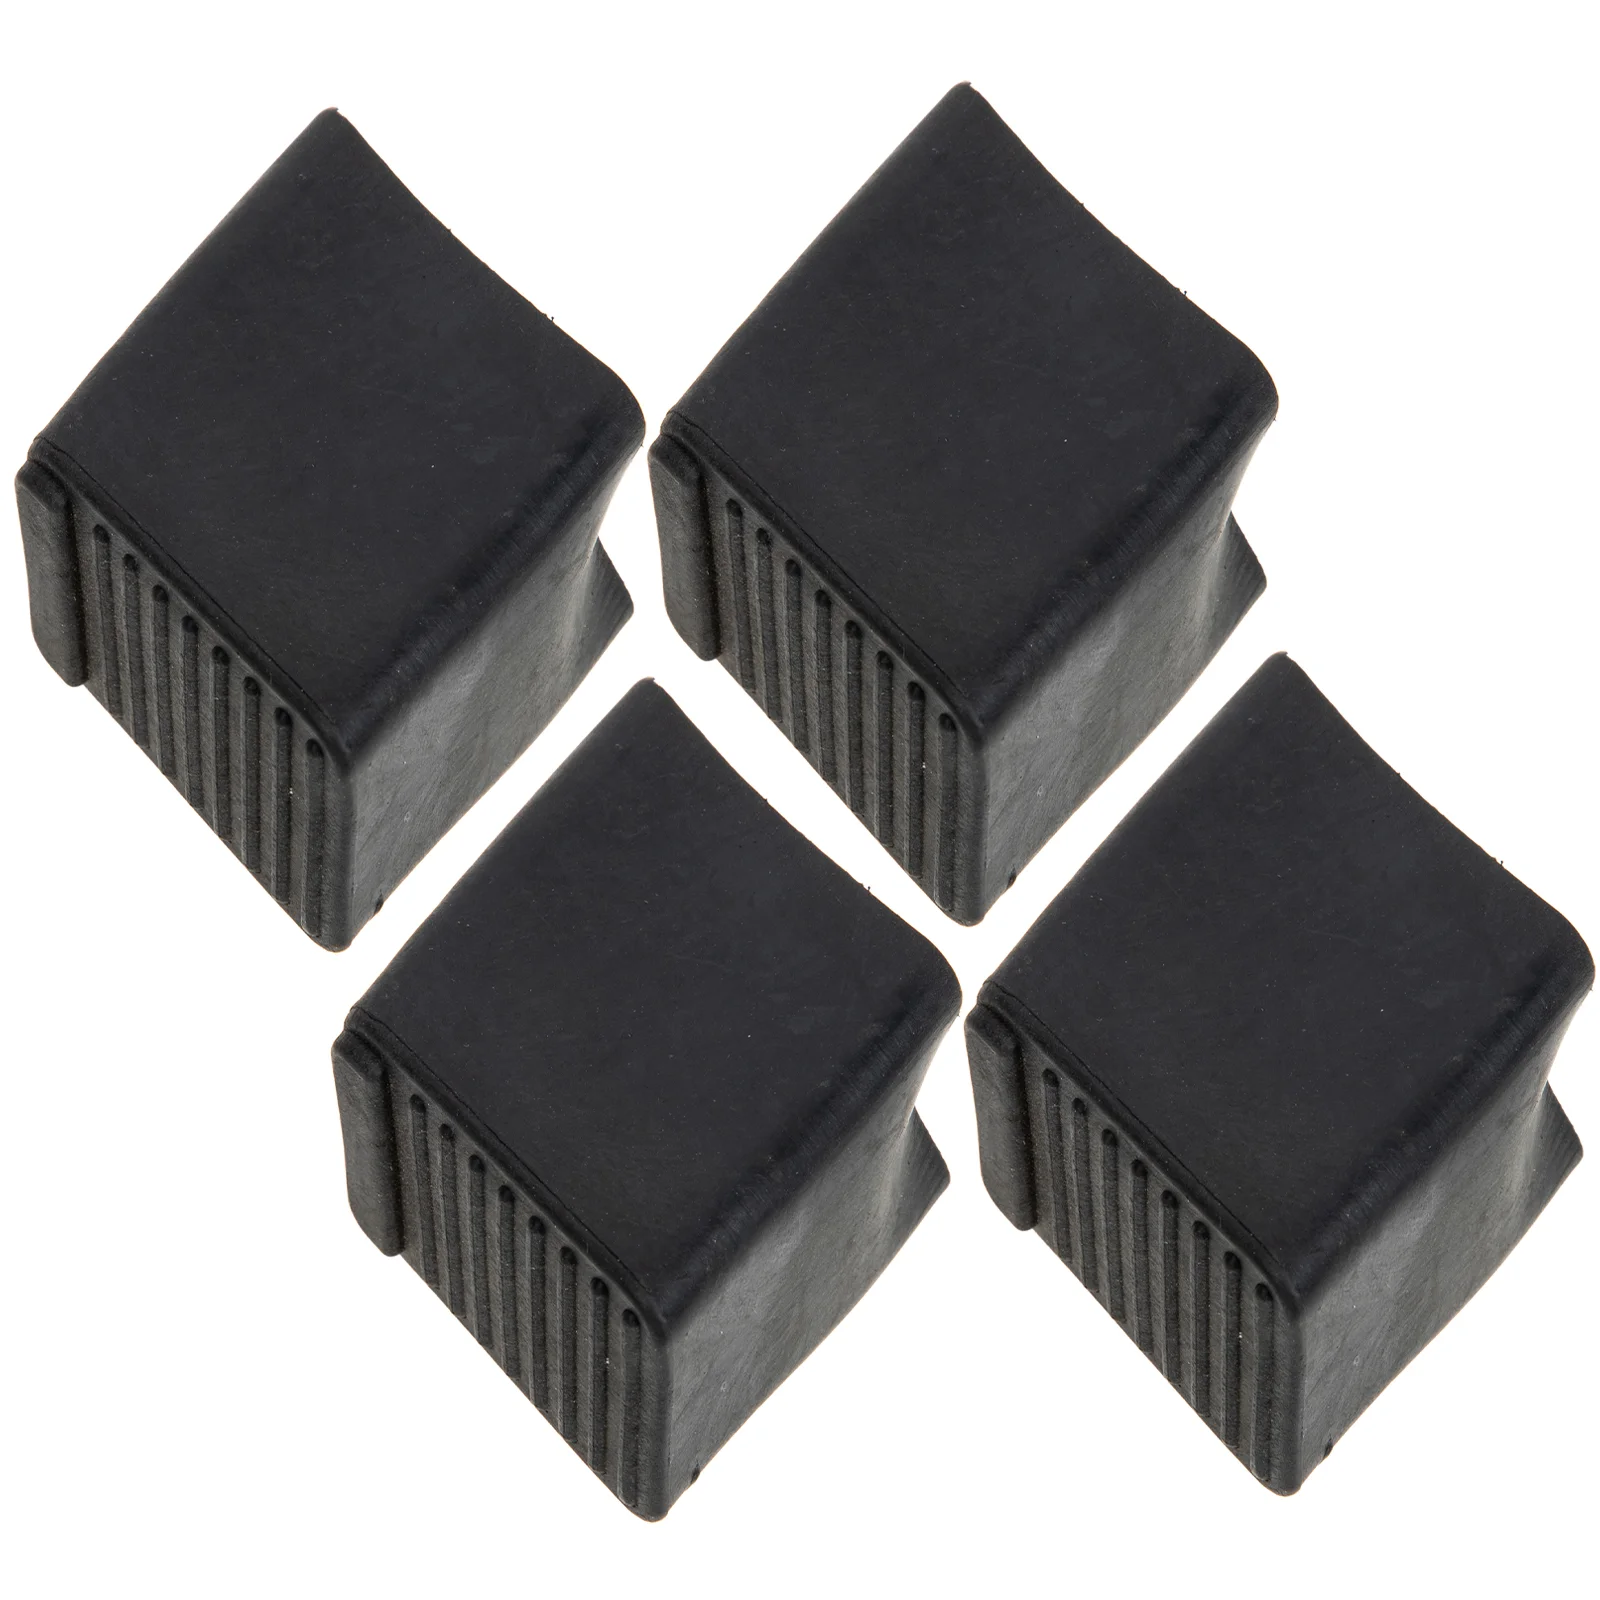 

4 Pcs Ladder Foot Covers Silicone Bumpers Non- Mat Chair Leg Floor Protectors Werner Step Pads Caps Pool Feet Replacements